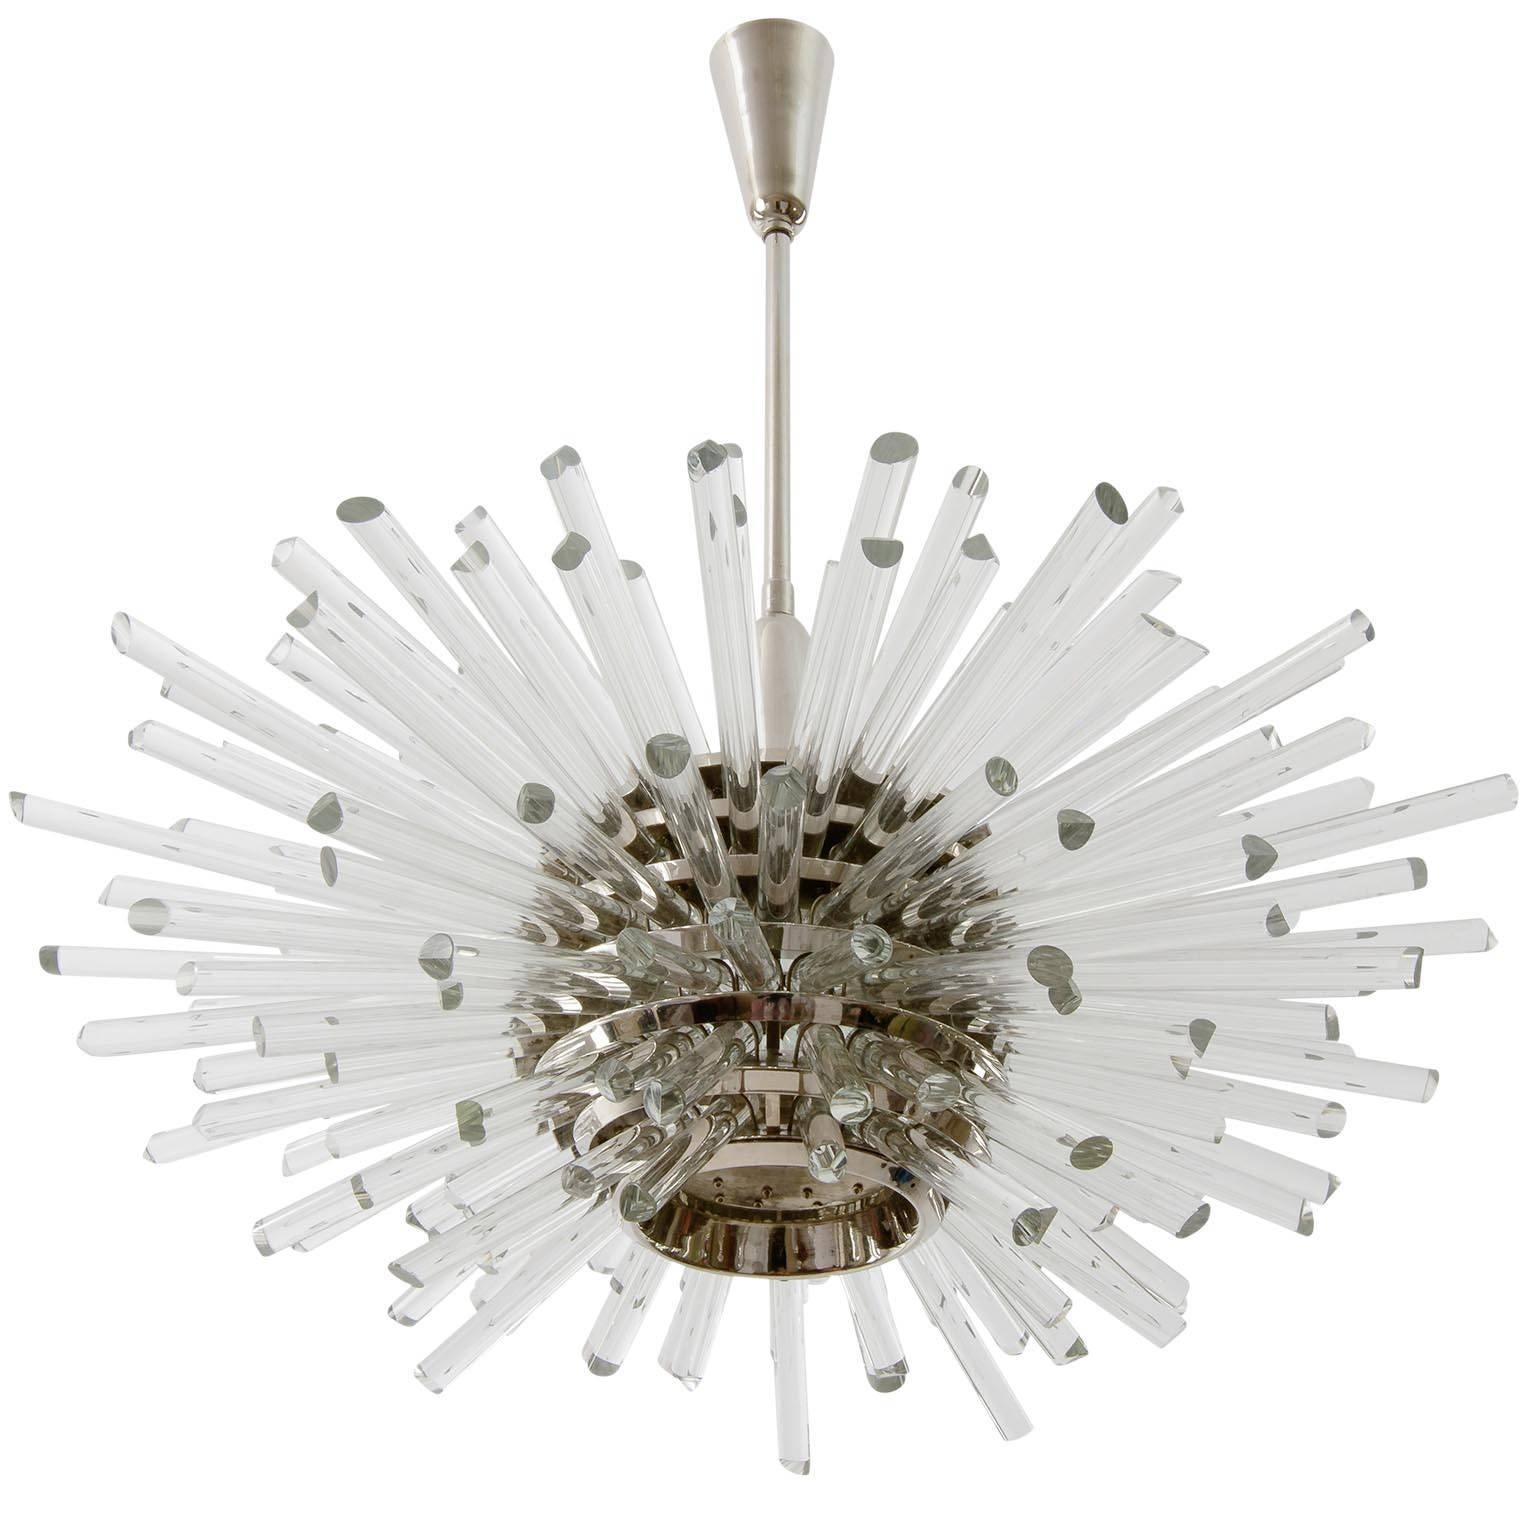 A fantastic sputnik chandelier by Bakalowits & Söhne, Vienna, Austria, manufactured in Mid-Century, circa 1970 (late 1960s or early 1970s). 
A layered multi-tier structure made of nickel-plated brass rings and glass rods with faceted ends in